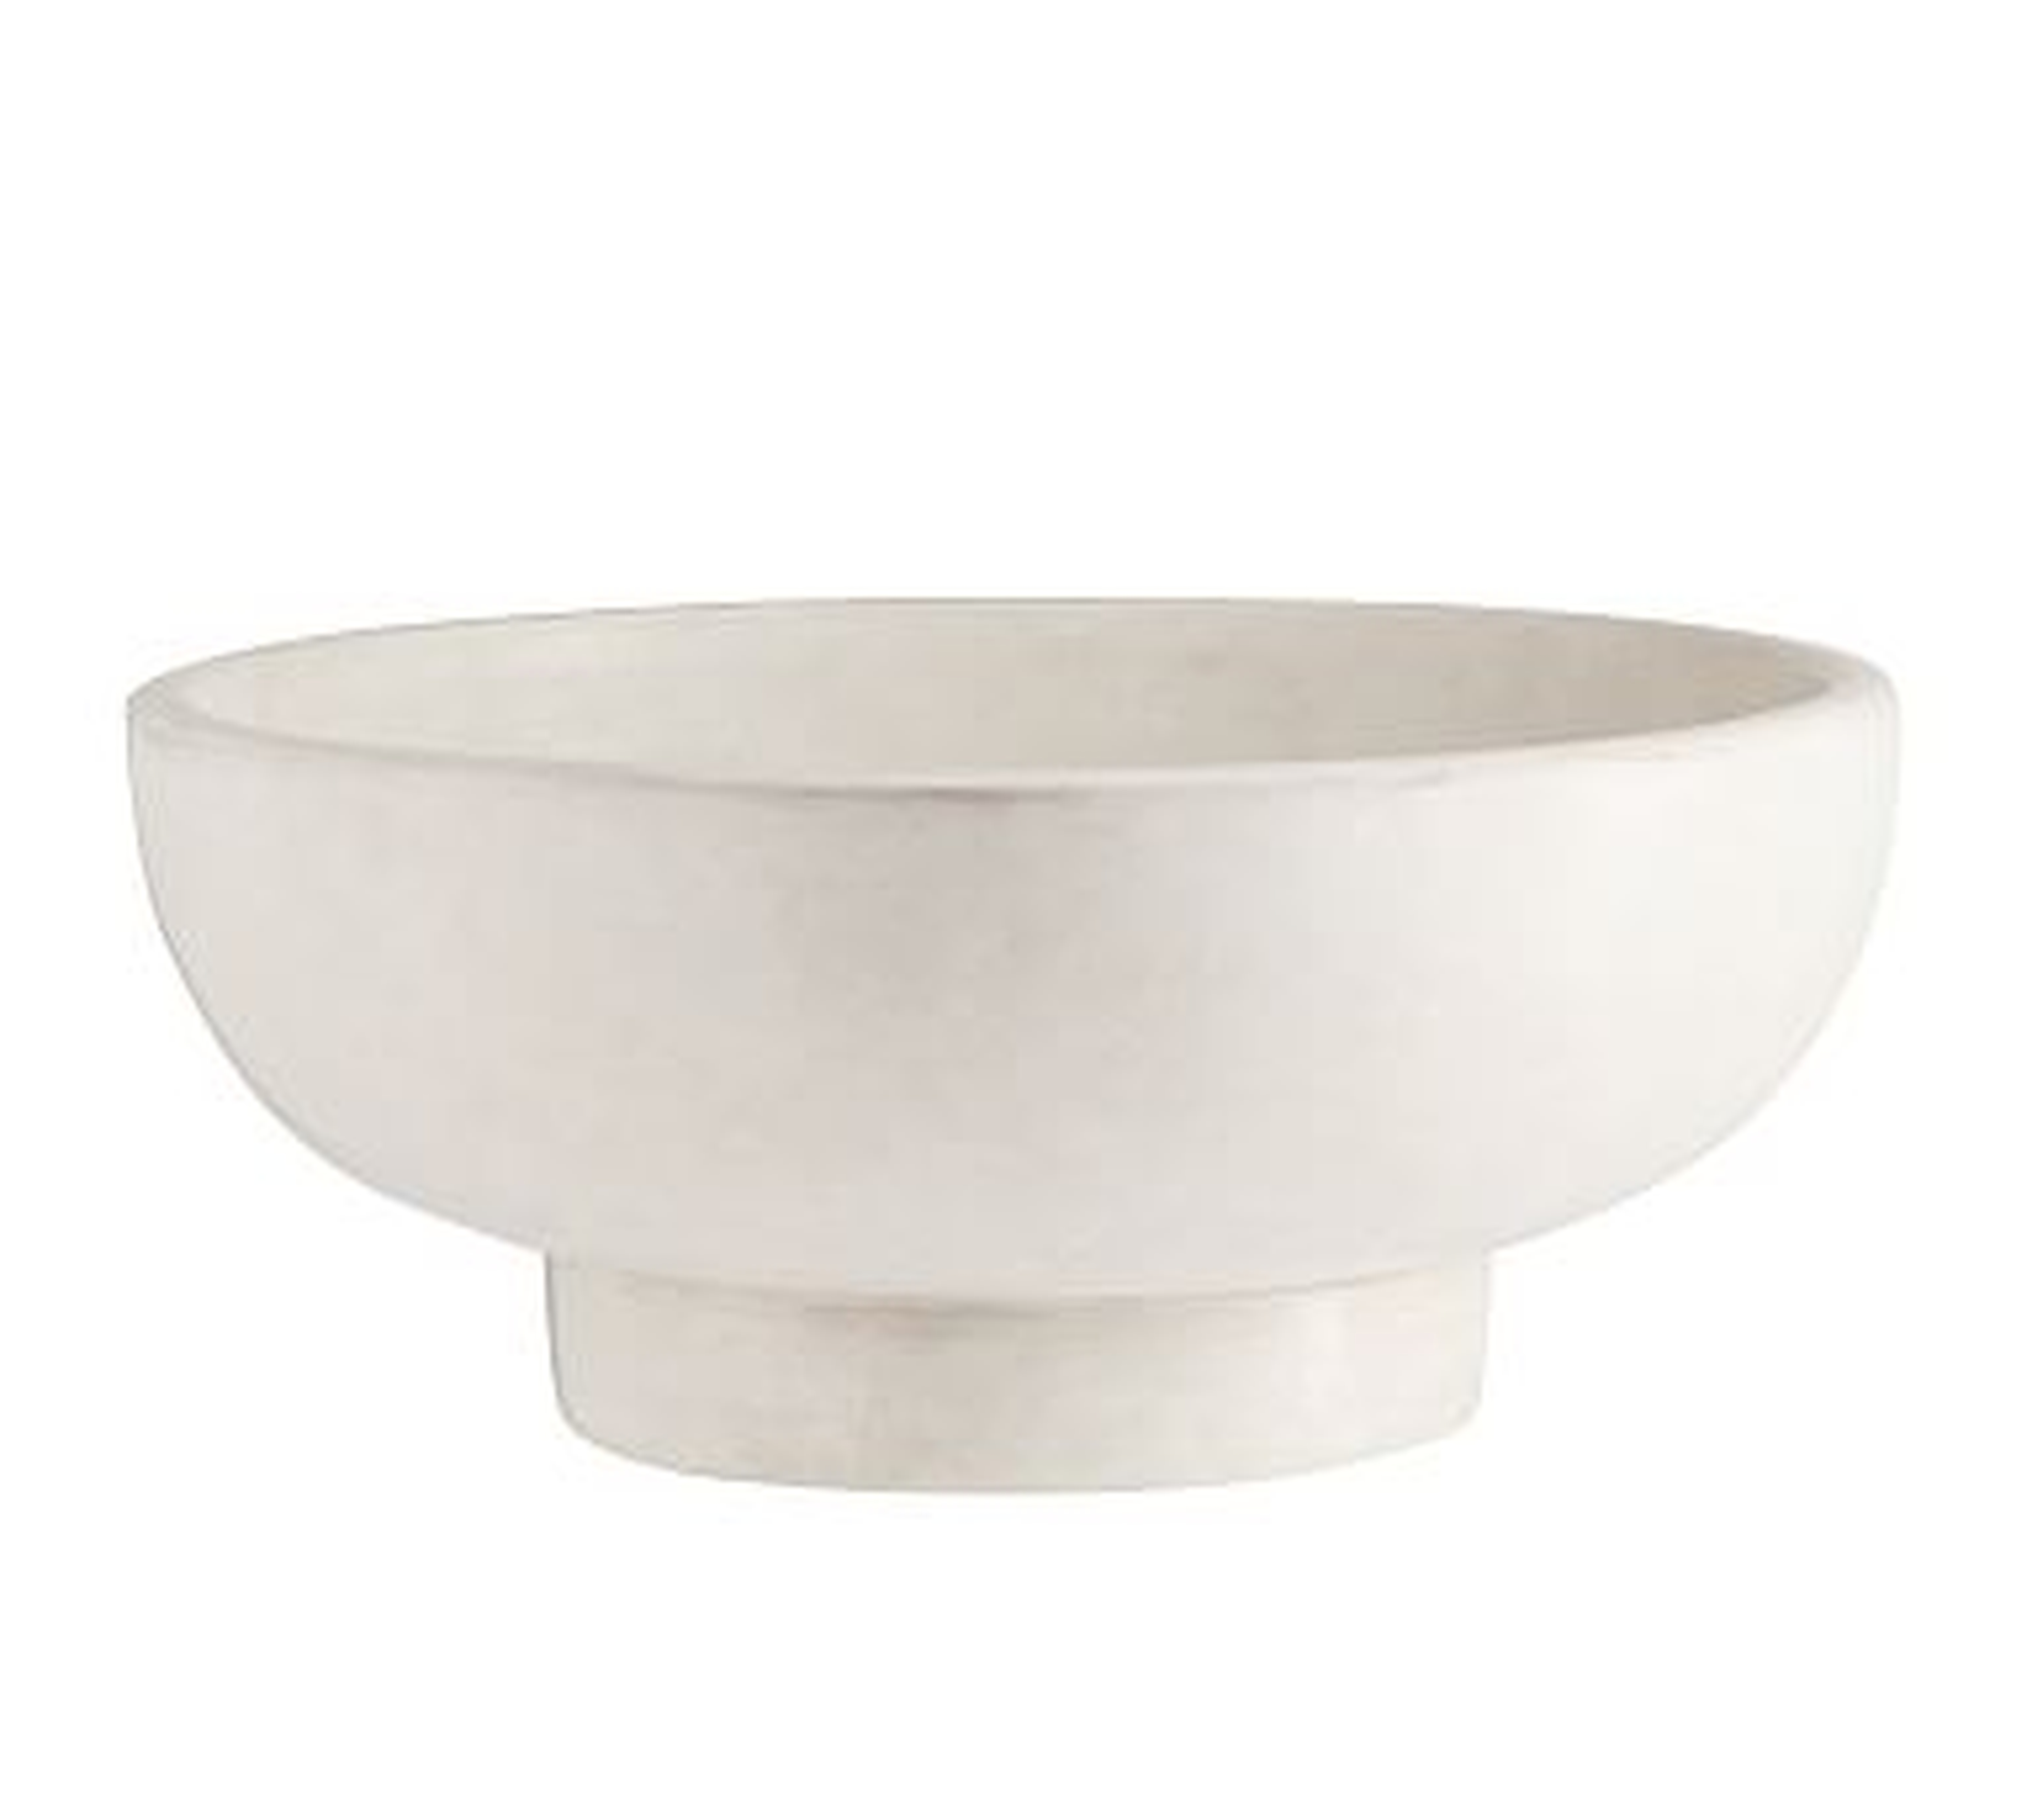 Orion Handcrafted Terracotta Bowl, Large, White - Pottery Barn